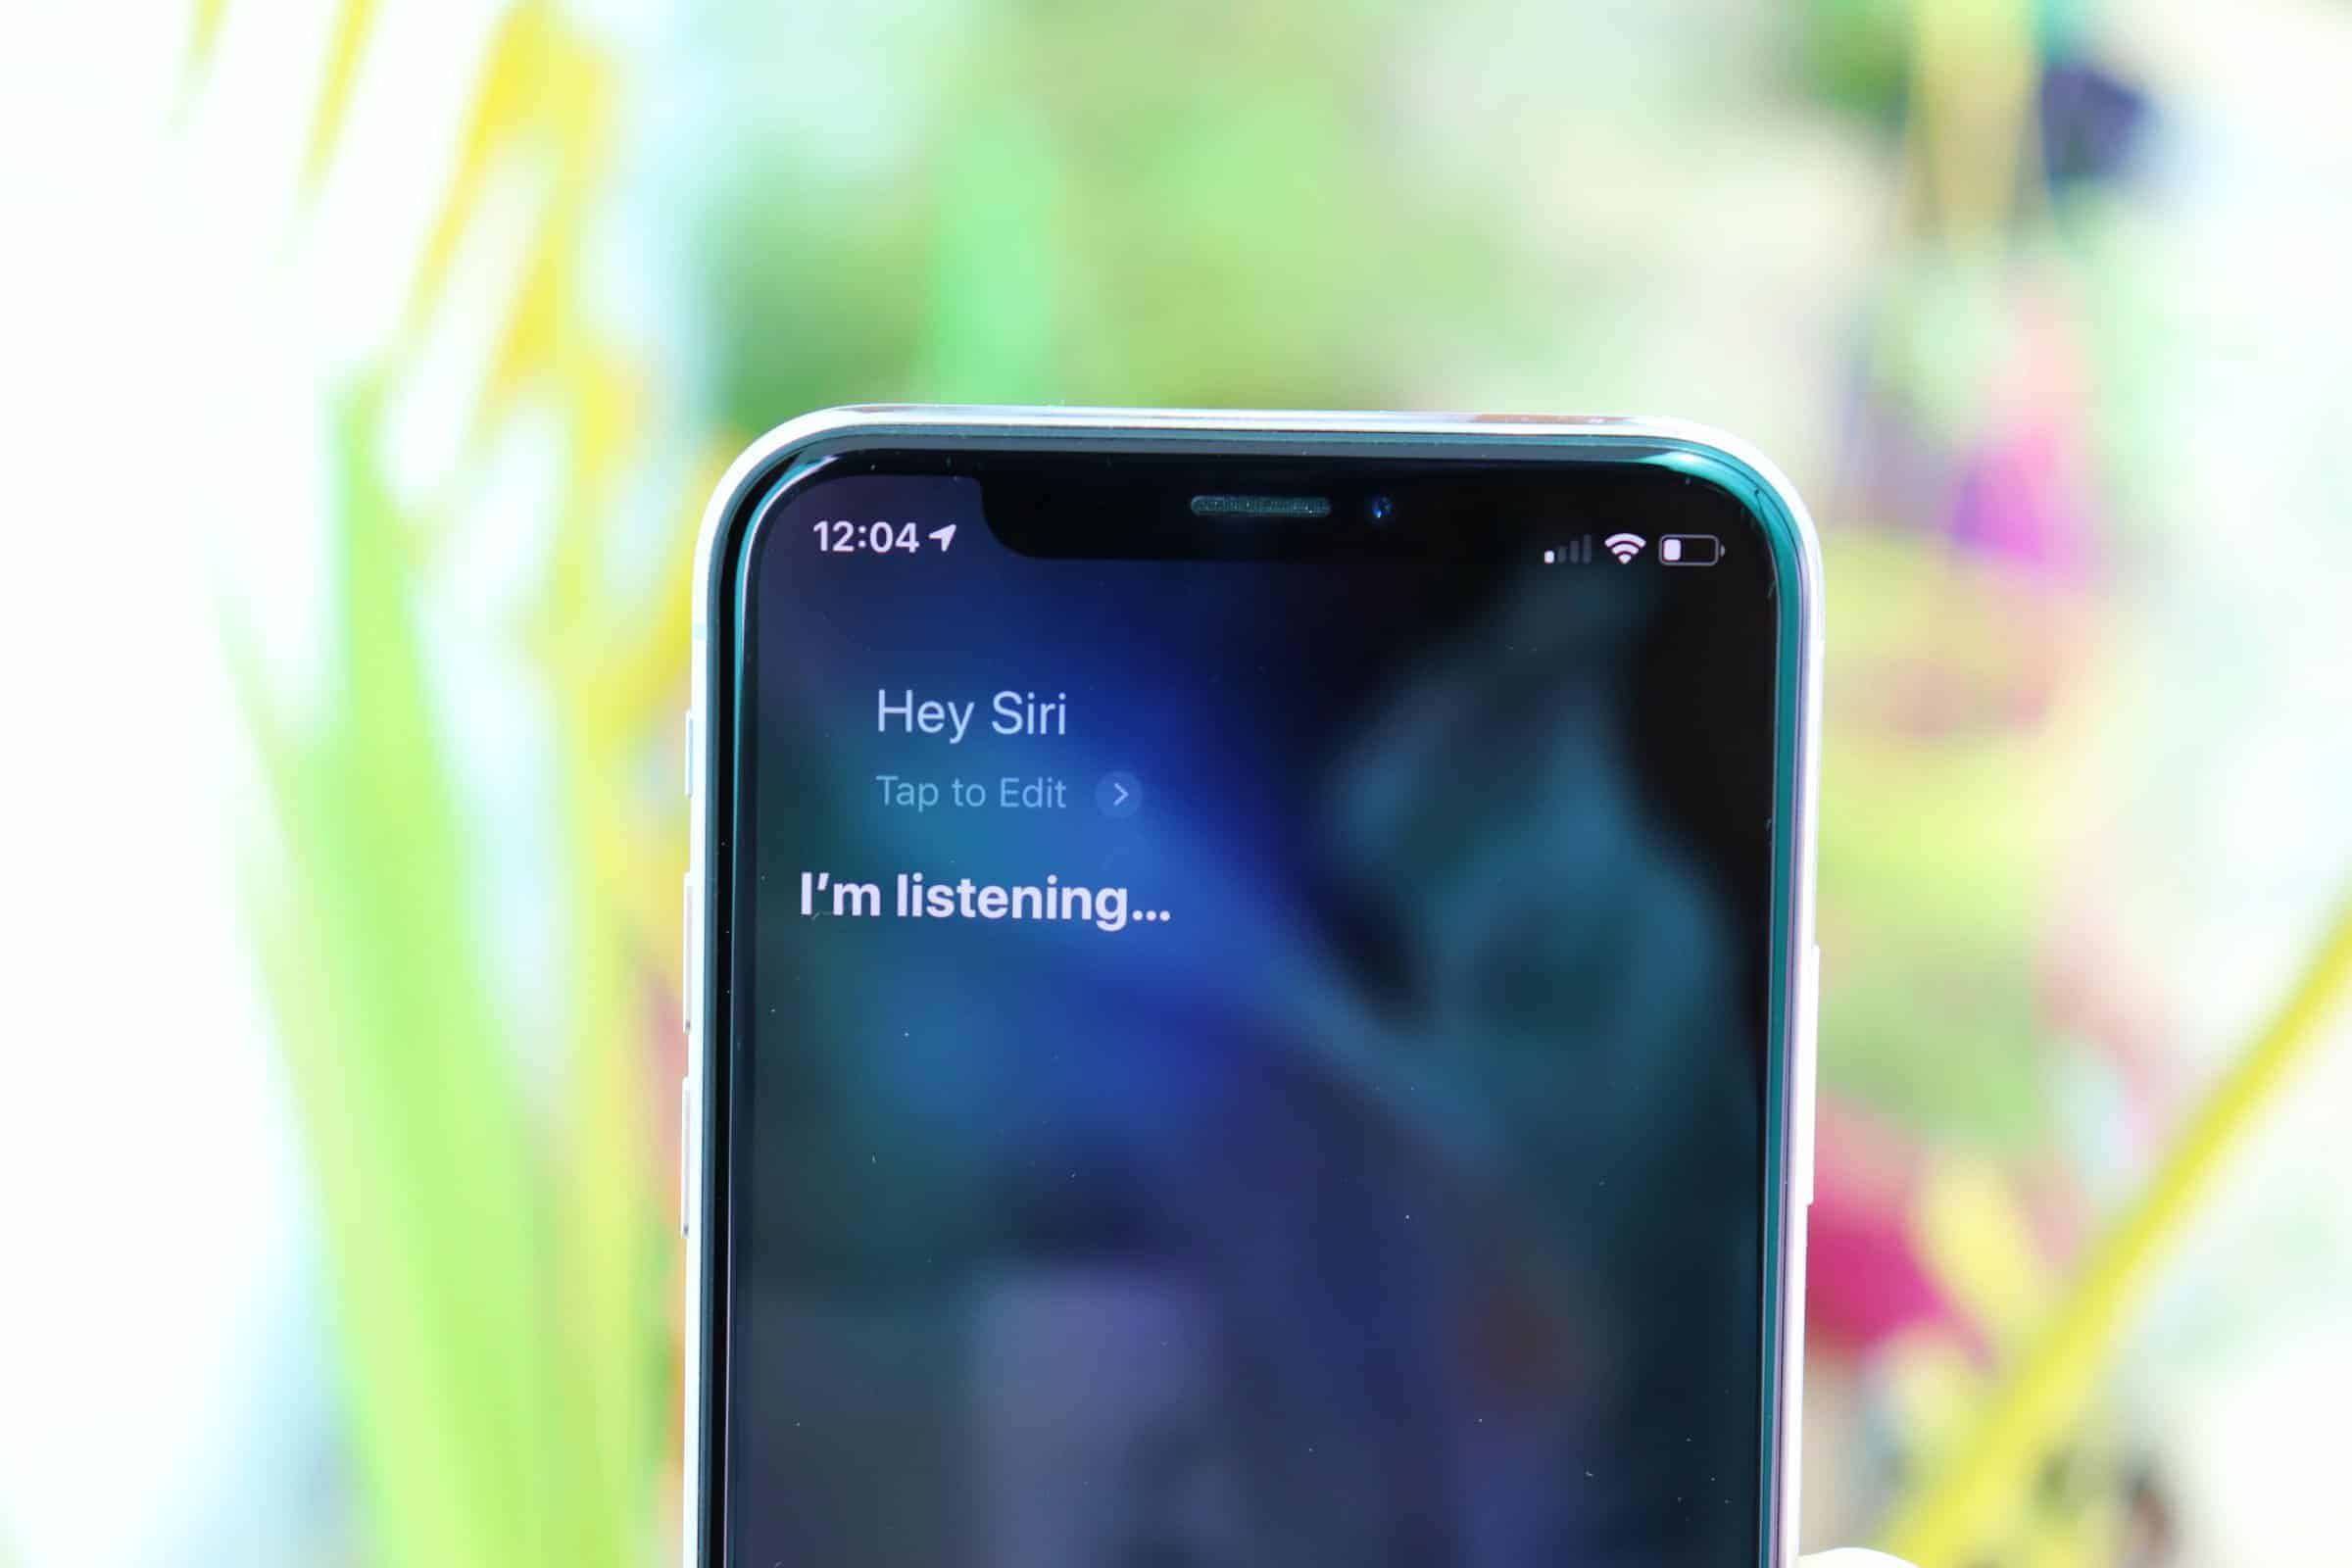 FIX: "Hey Siri" not working on iPhone XS and XS Max